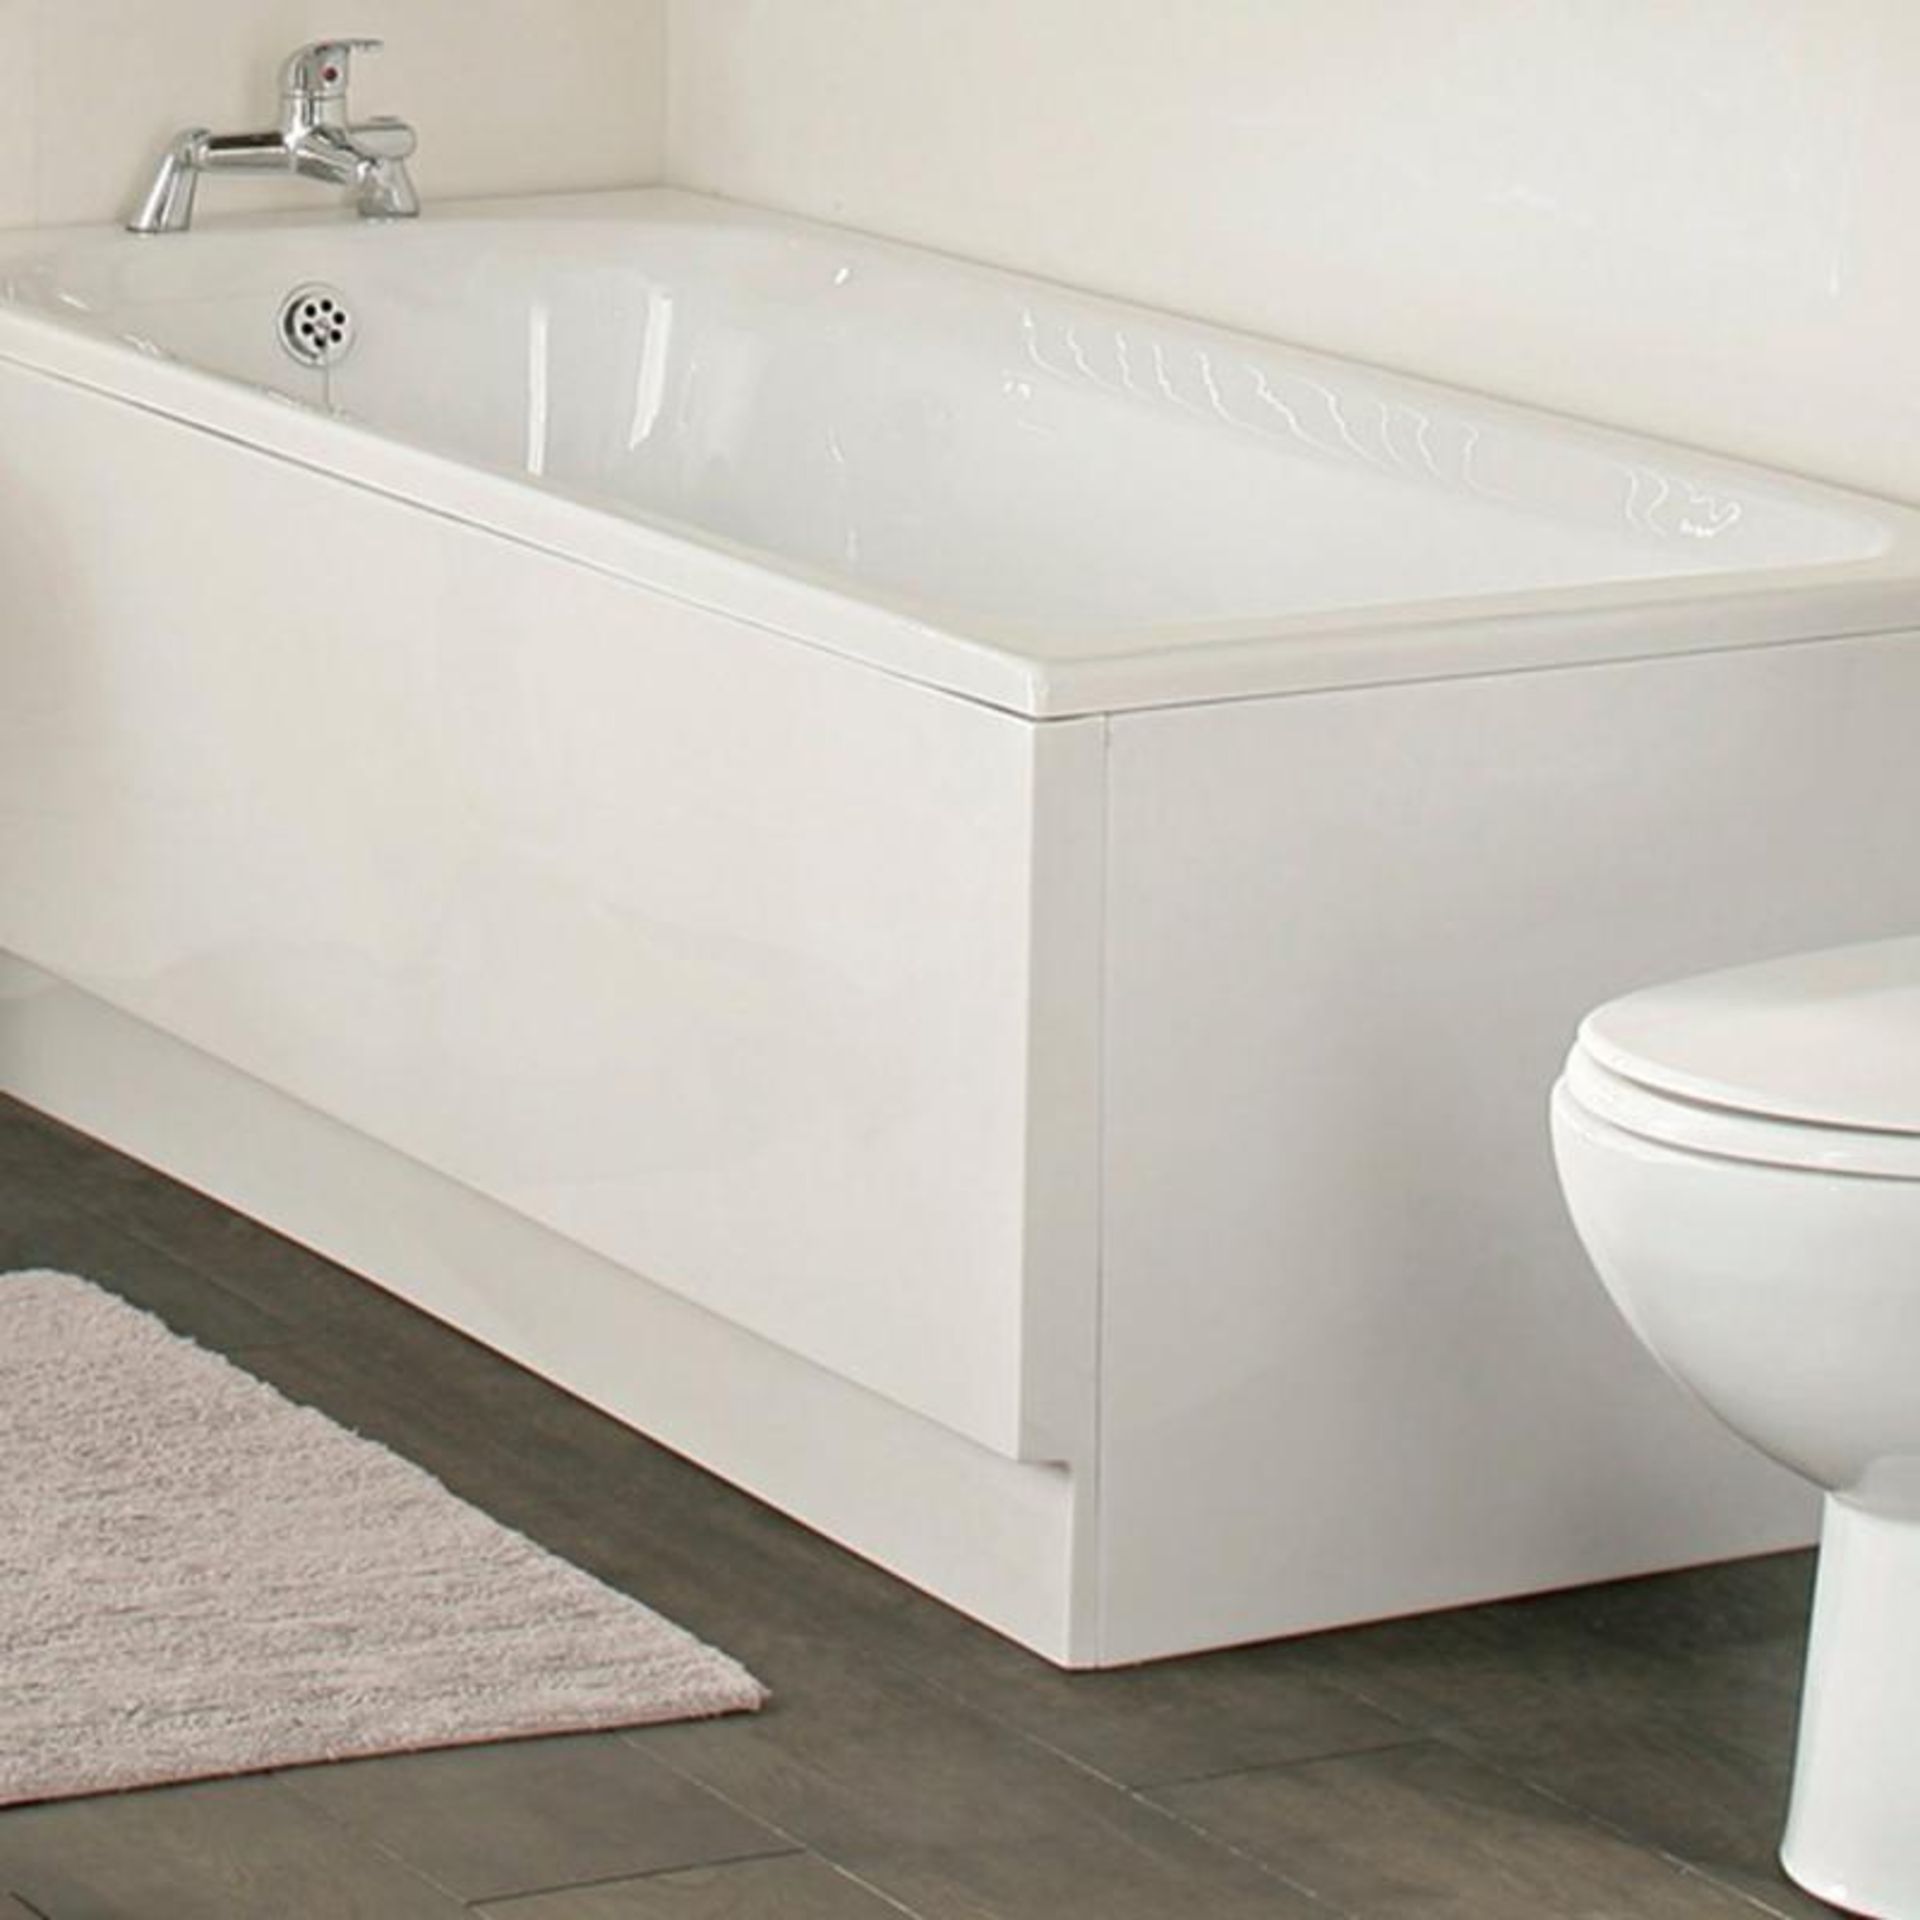 1 x Synergy Front Bath Panel White 1700mm - New & Boxed Stock - Ref: SY-NBP002 - CL406 - Location: C